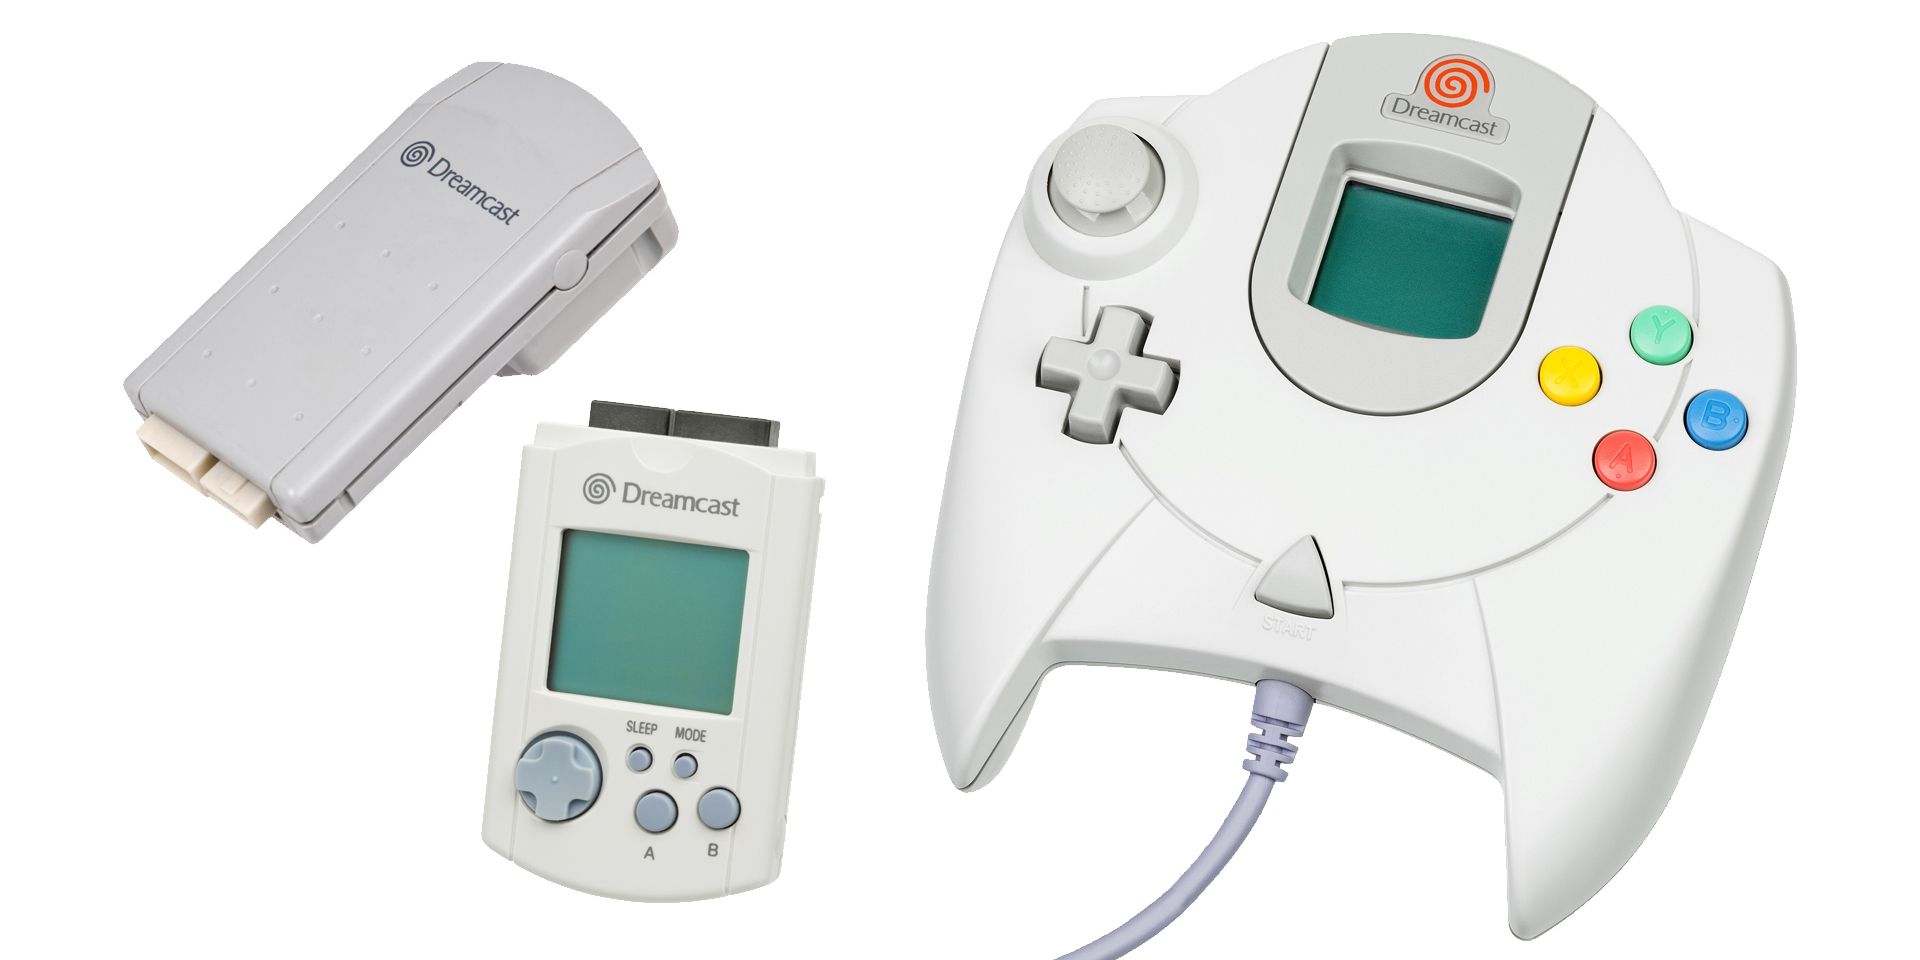 Things The Dreamcast Controller Did Better Than Most Other
Gamepads